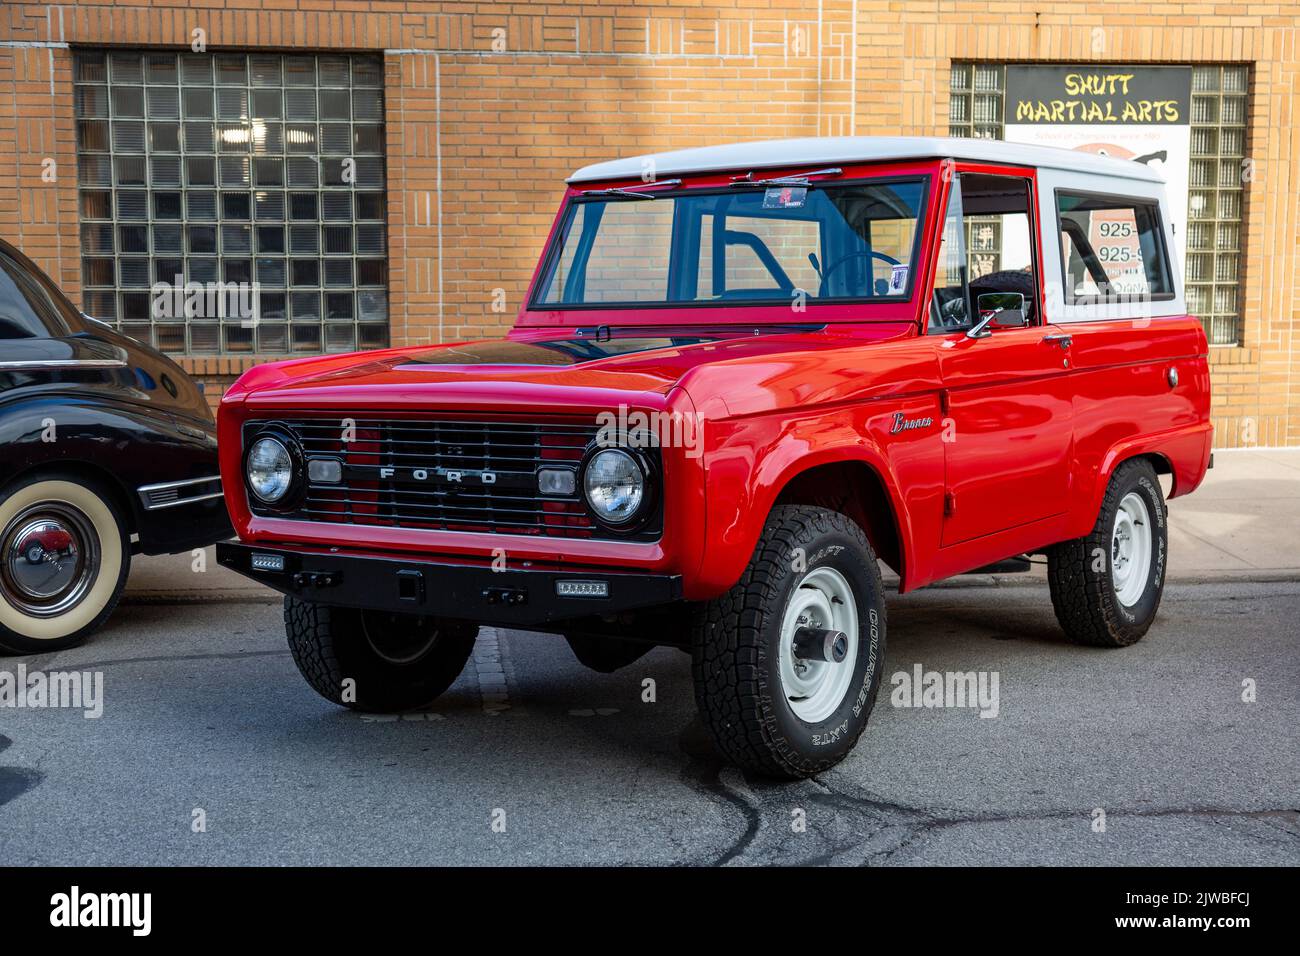 A red Ford Bronco four wheel drive sport utility vehicle on display at a car show in Auburn, Indiana, USA. Stock Photo